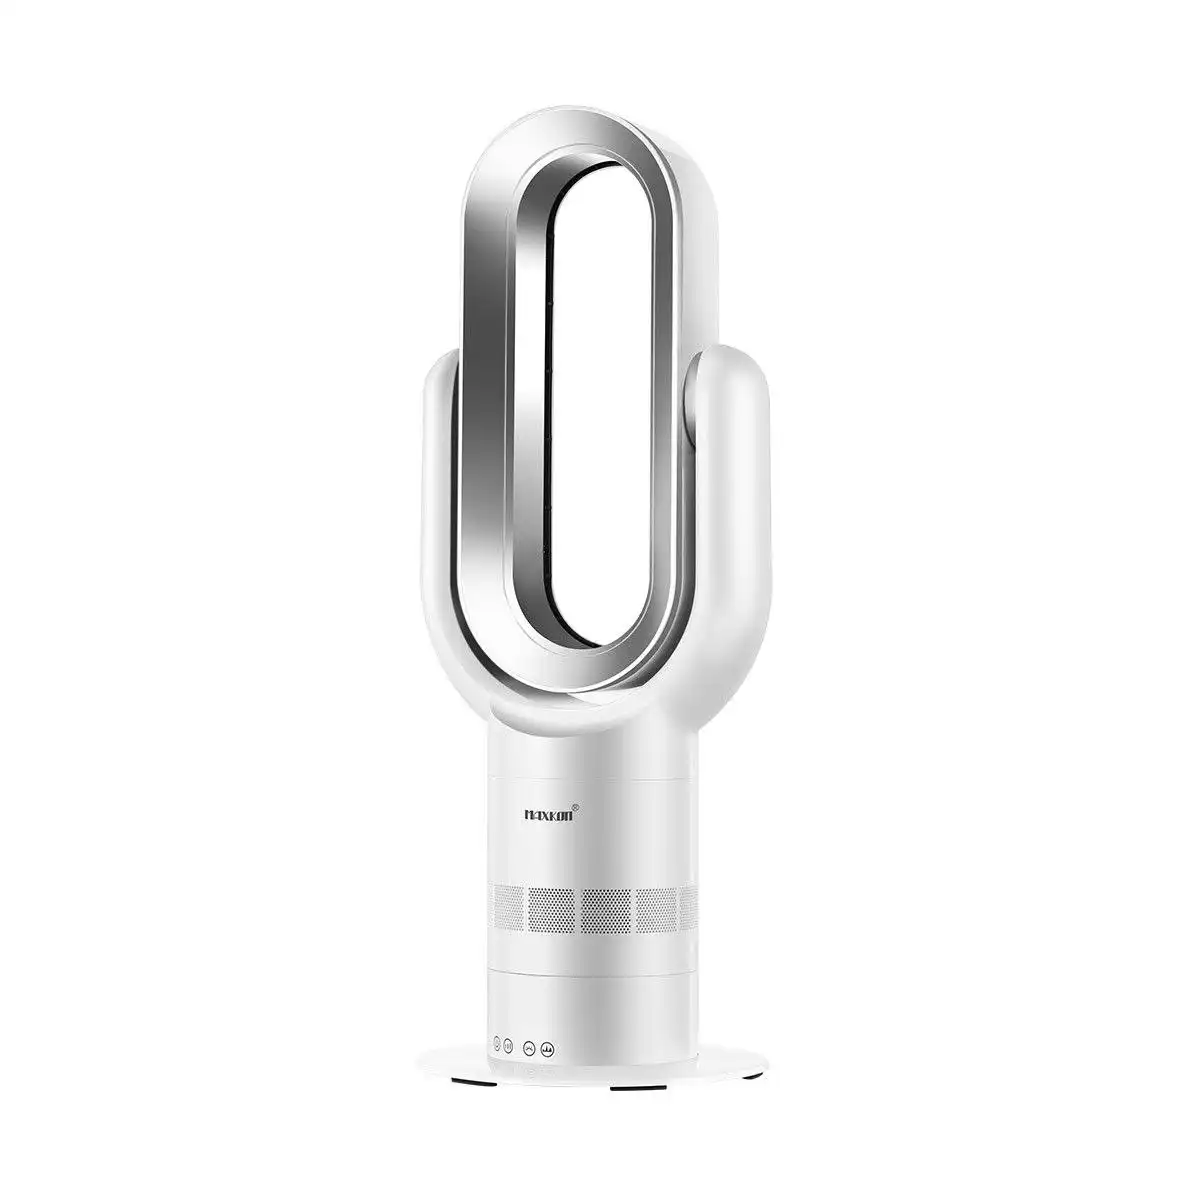 Maxkon Bladeless Tower Fan Oscillating Heating 2 In 1 Cool Hot with Led Screen and Remote Control